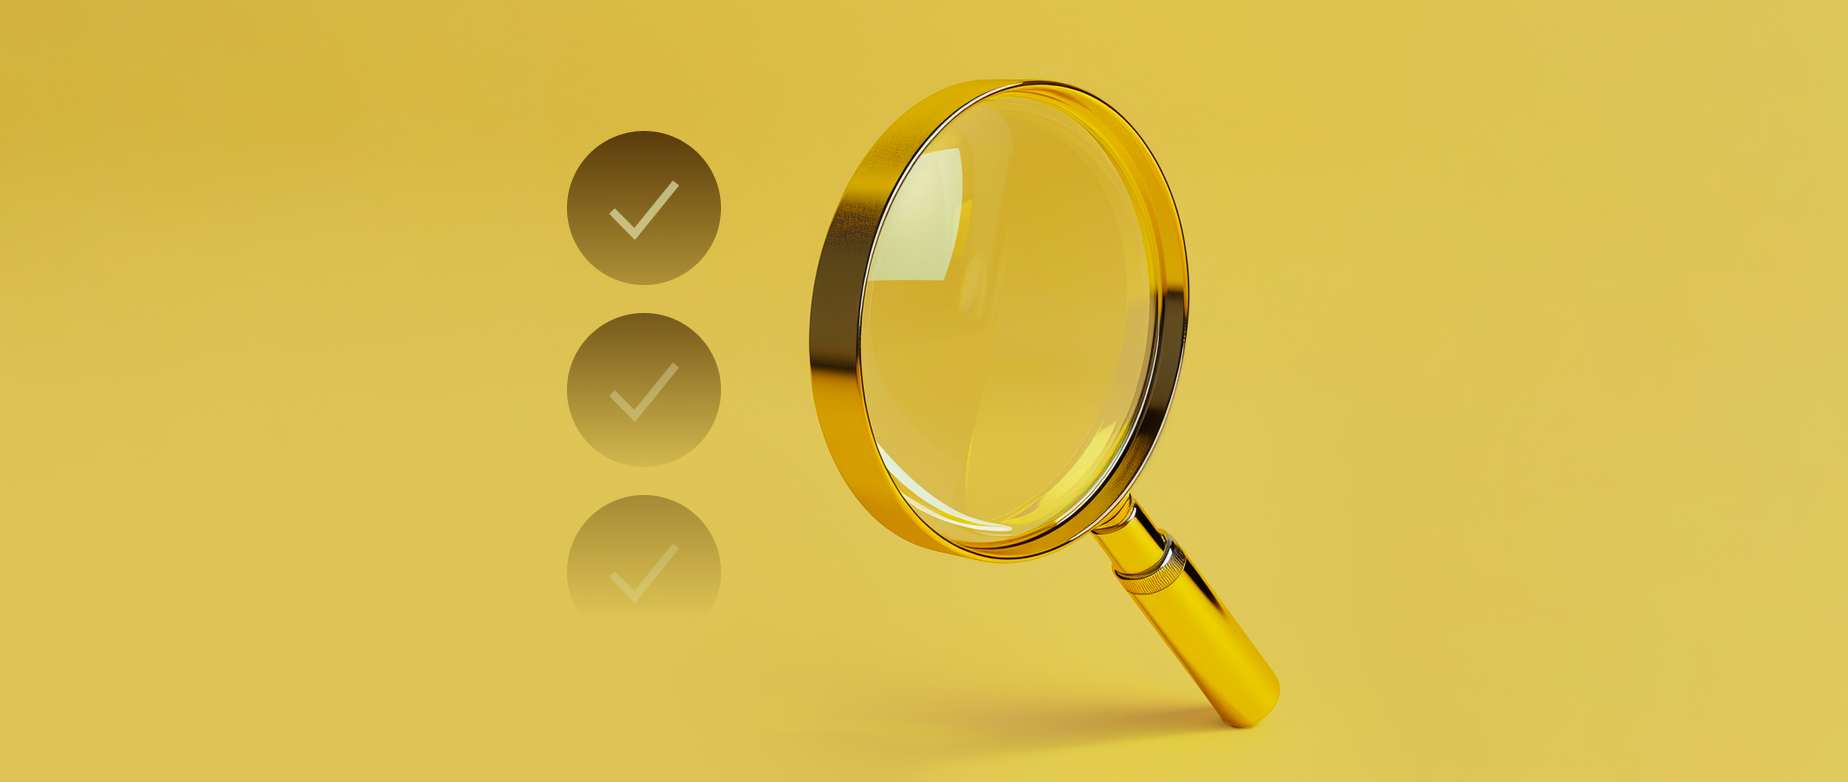 Three check marks next to a magnifying glass on a yellow background.